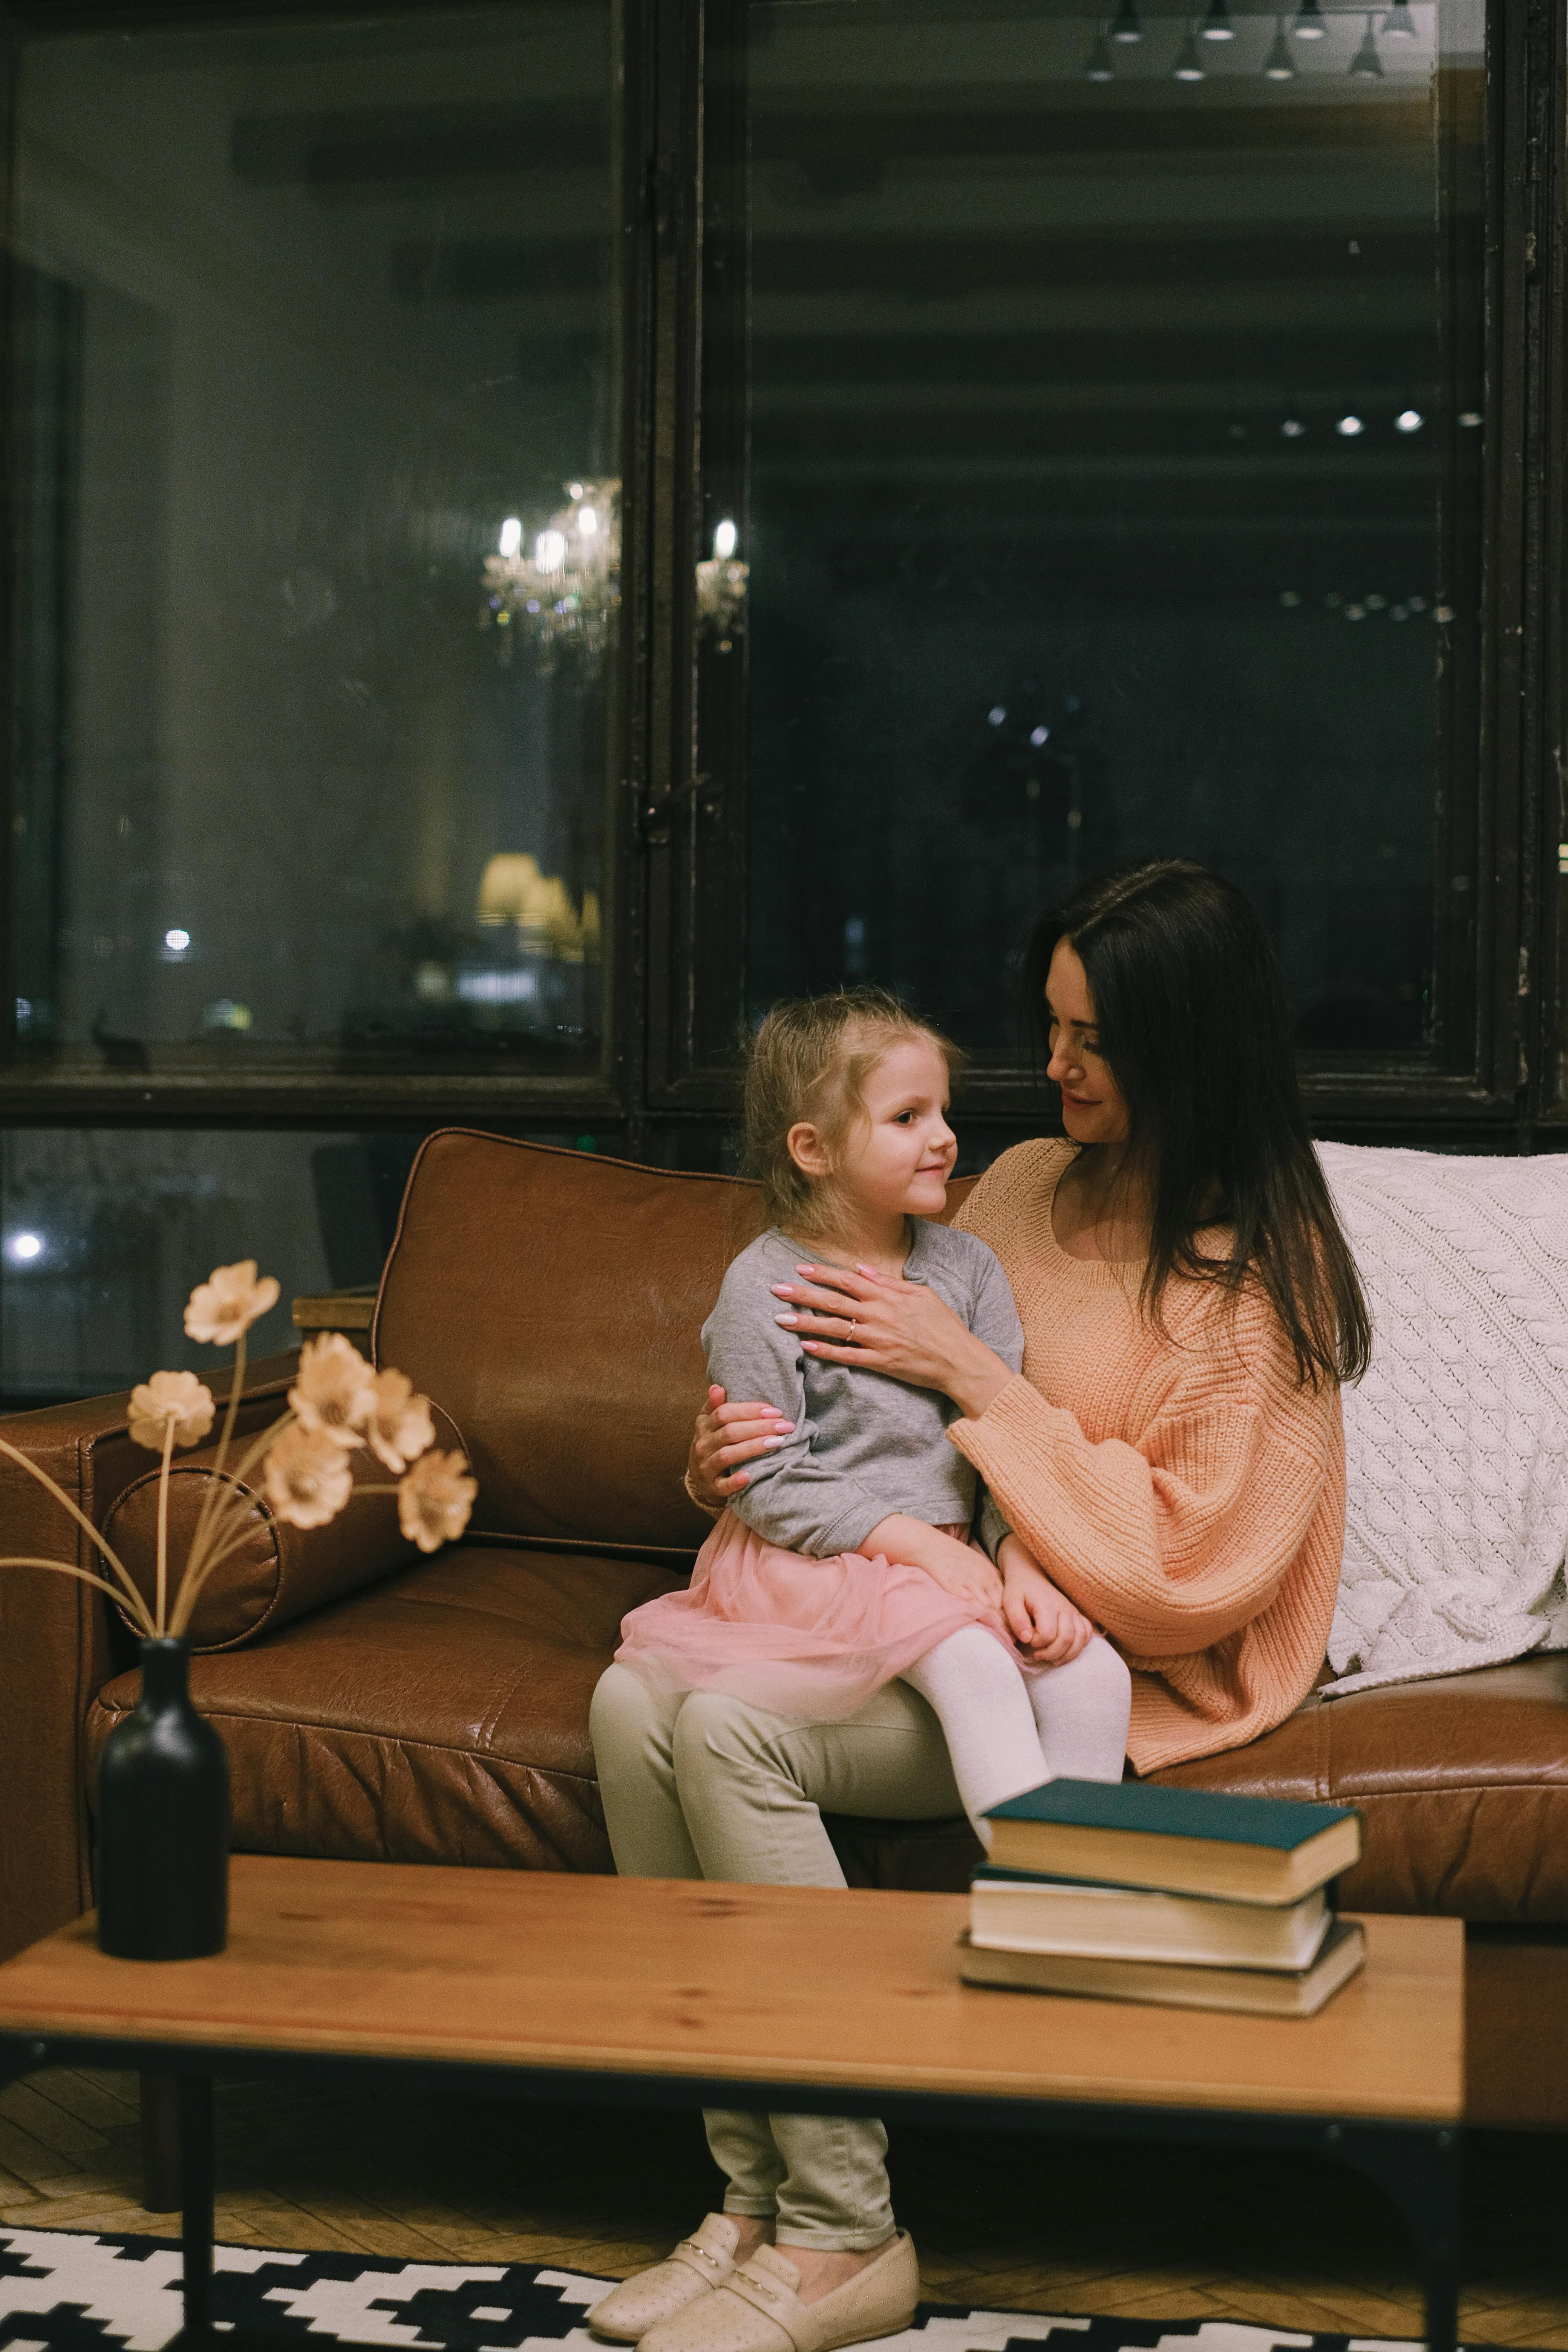 Little girl on her mother's lap | Source: Pexels